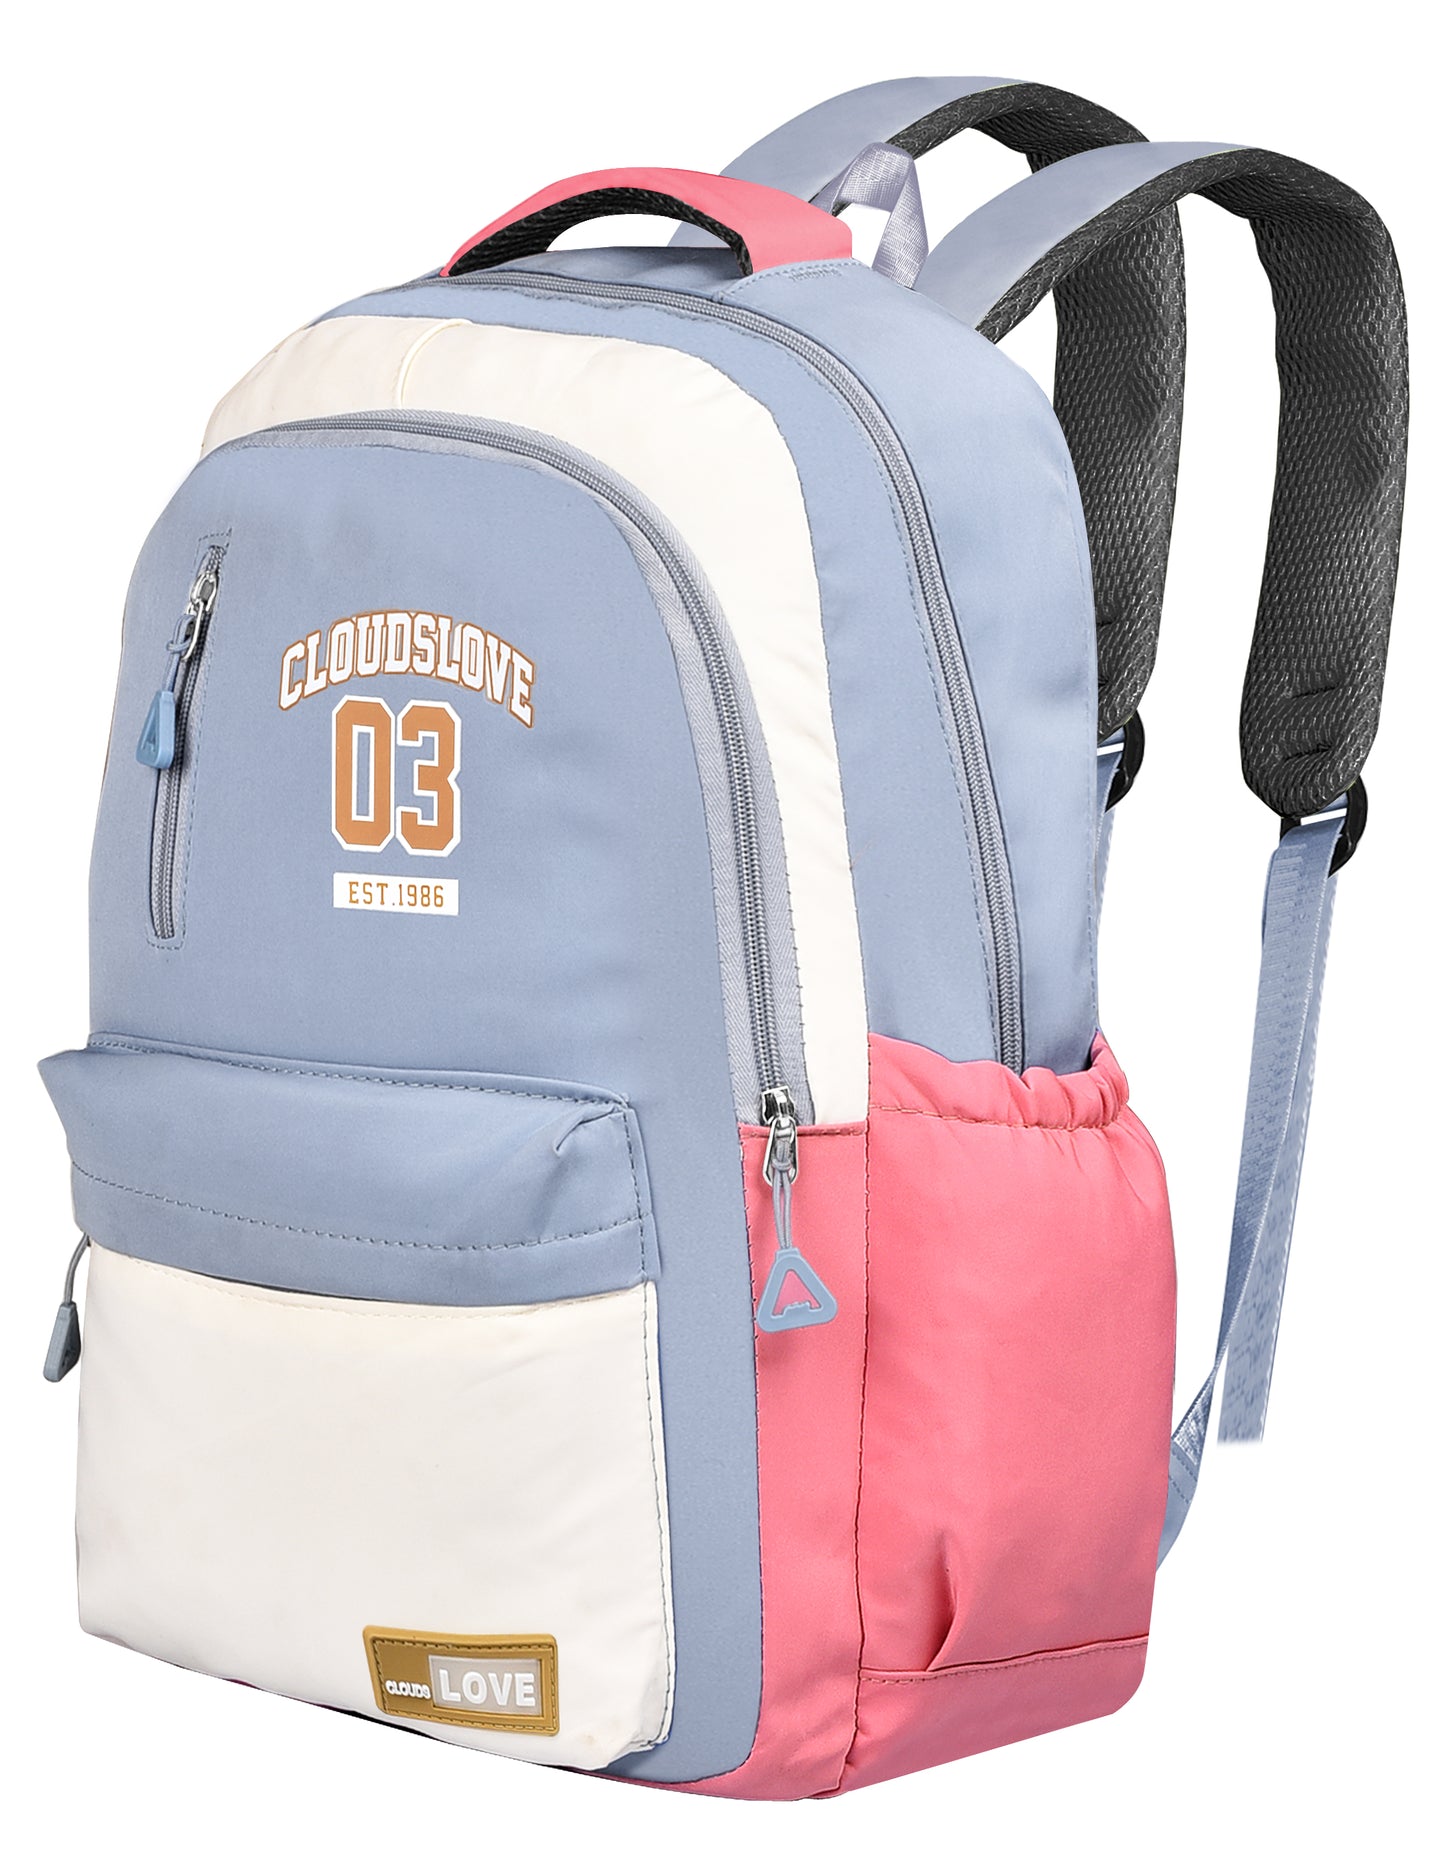 Clouds love Backpack for Girls,Cute, Colourful bags, Water Resistant and Lightweight.